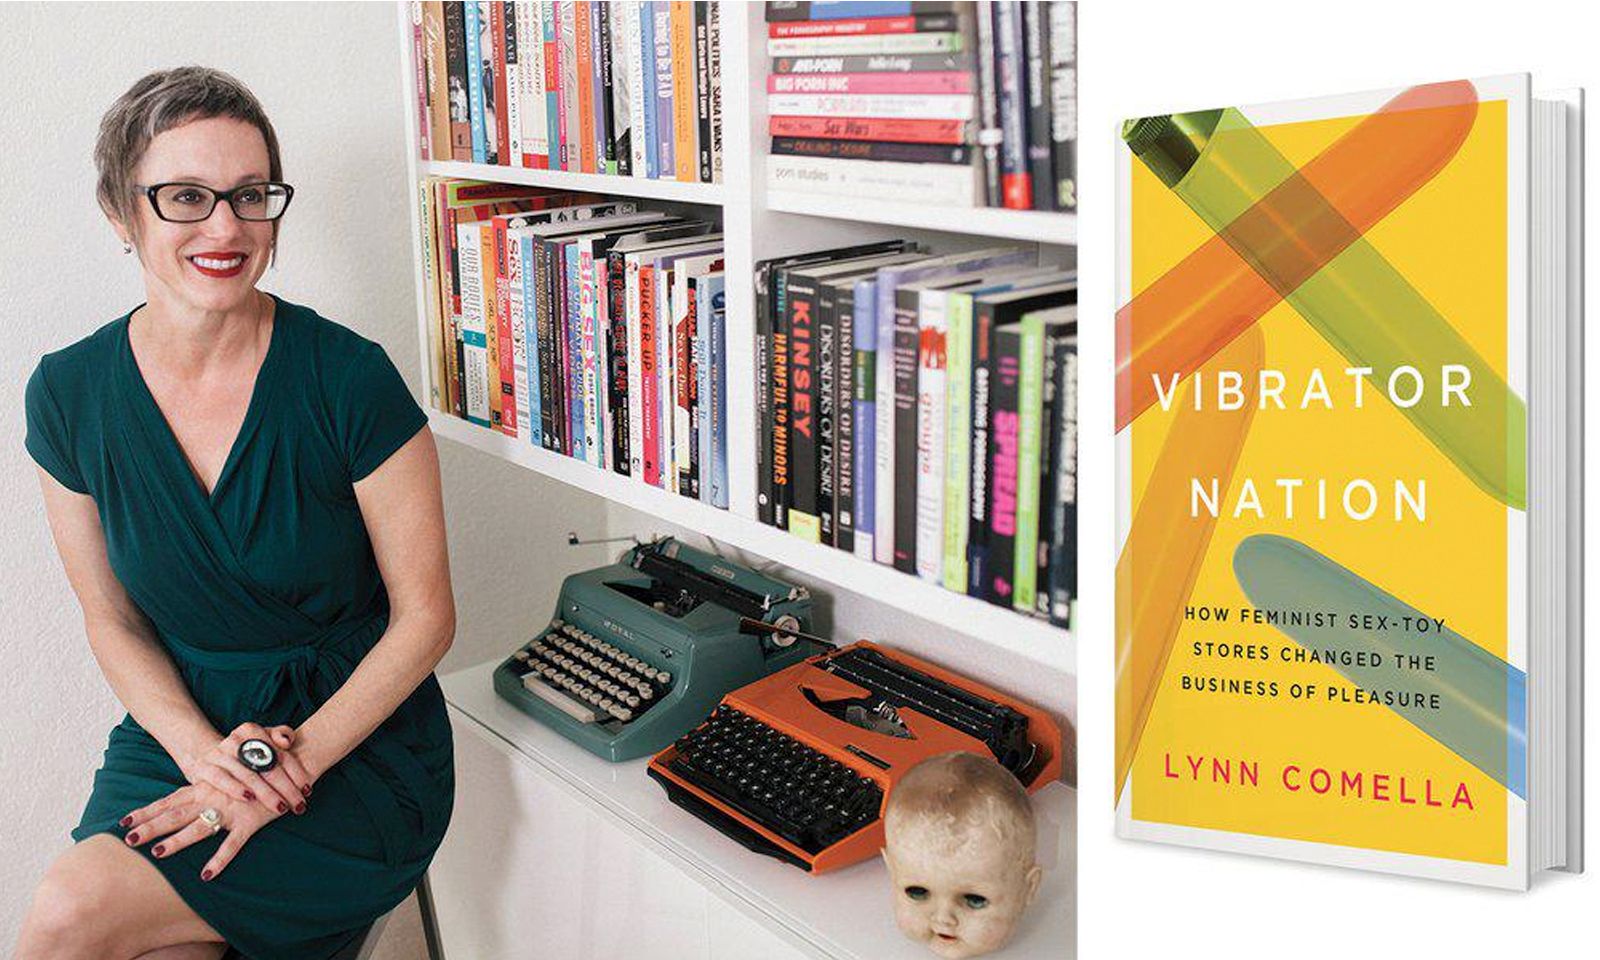 Lynn Comella’s ‘Vibrator Nation’ Book Tour Wrapping Up in NYC